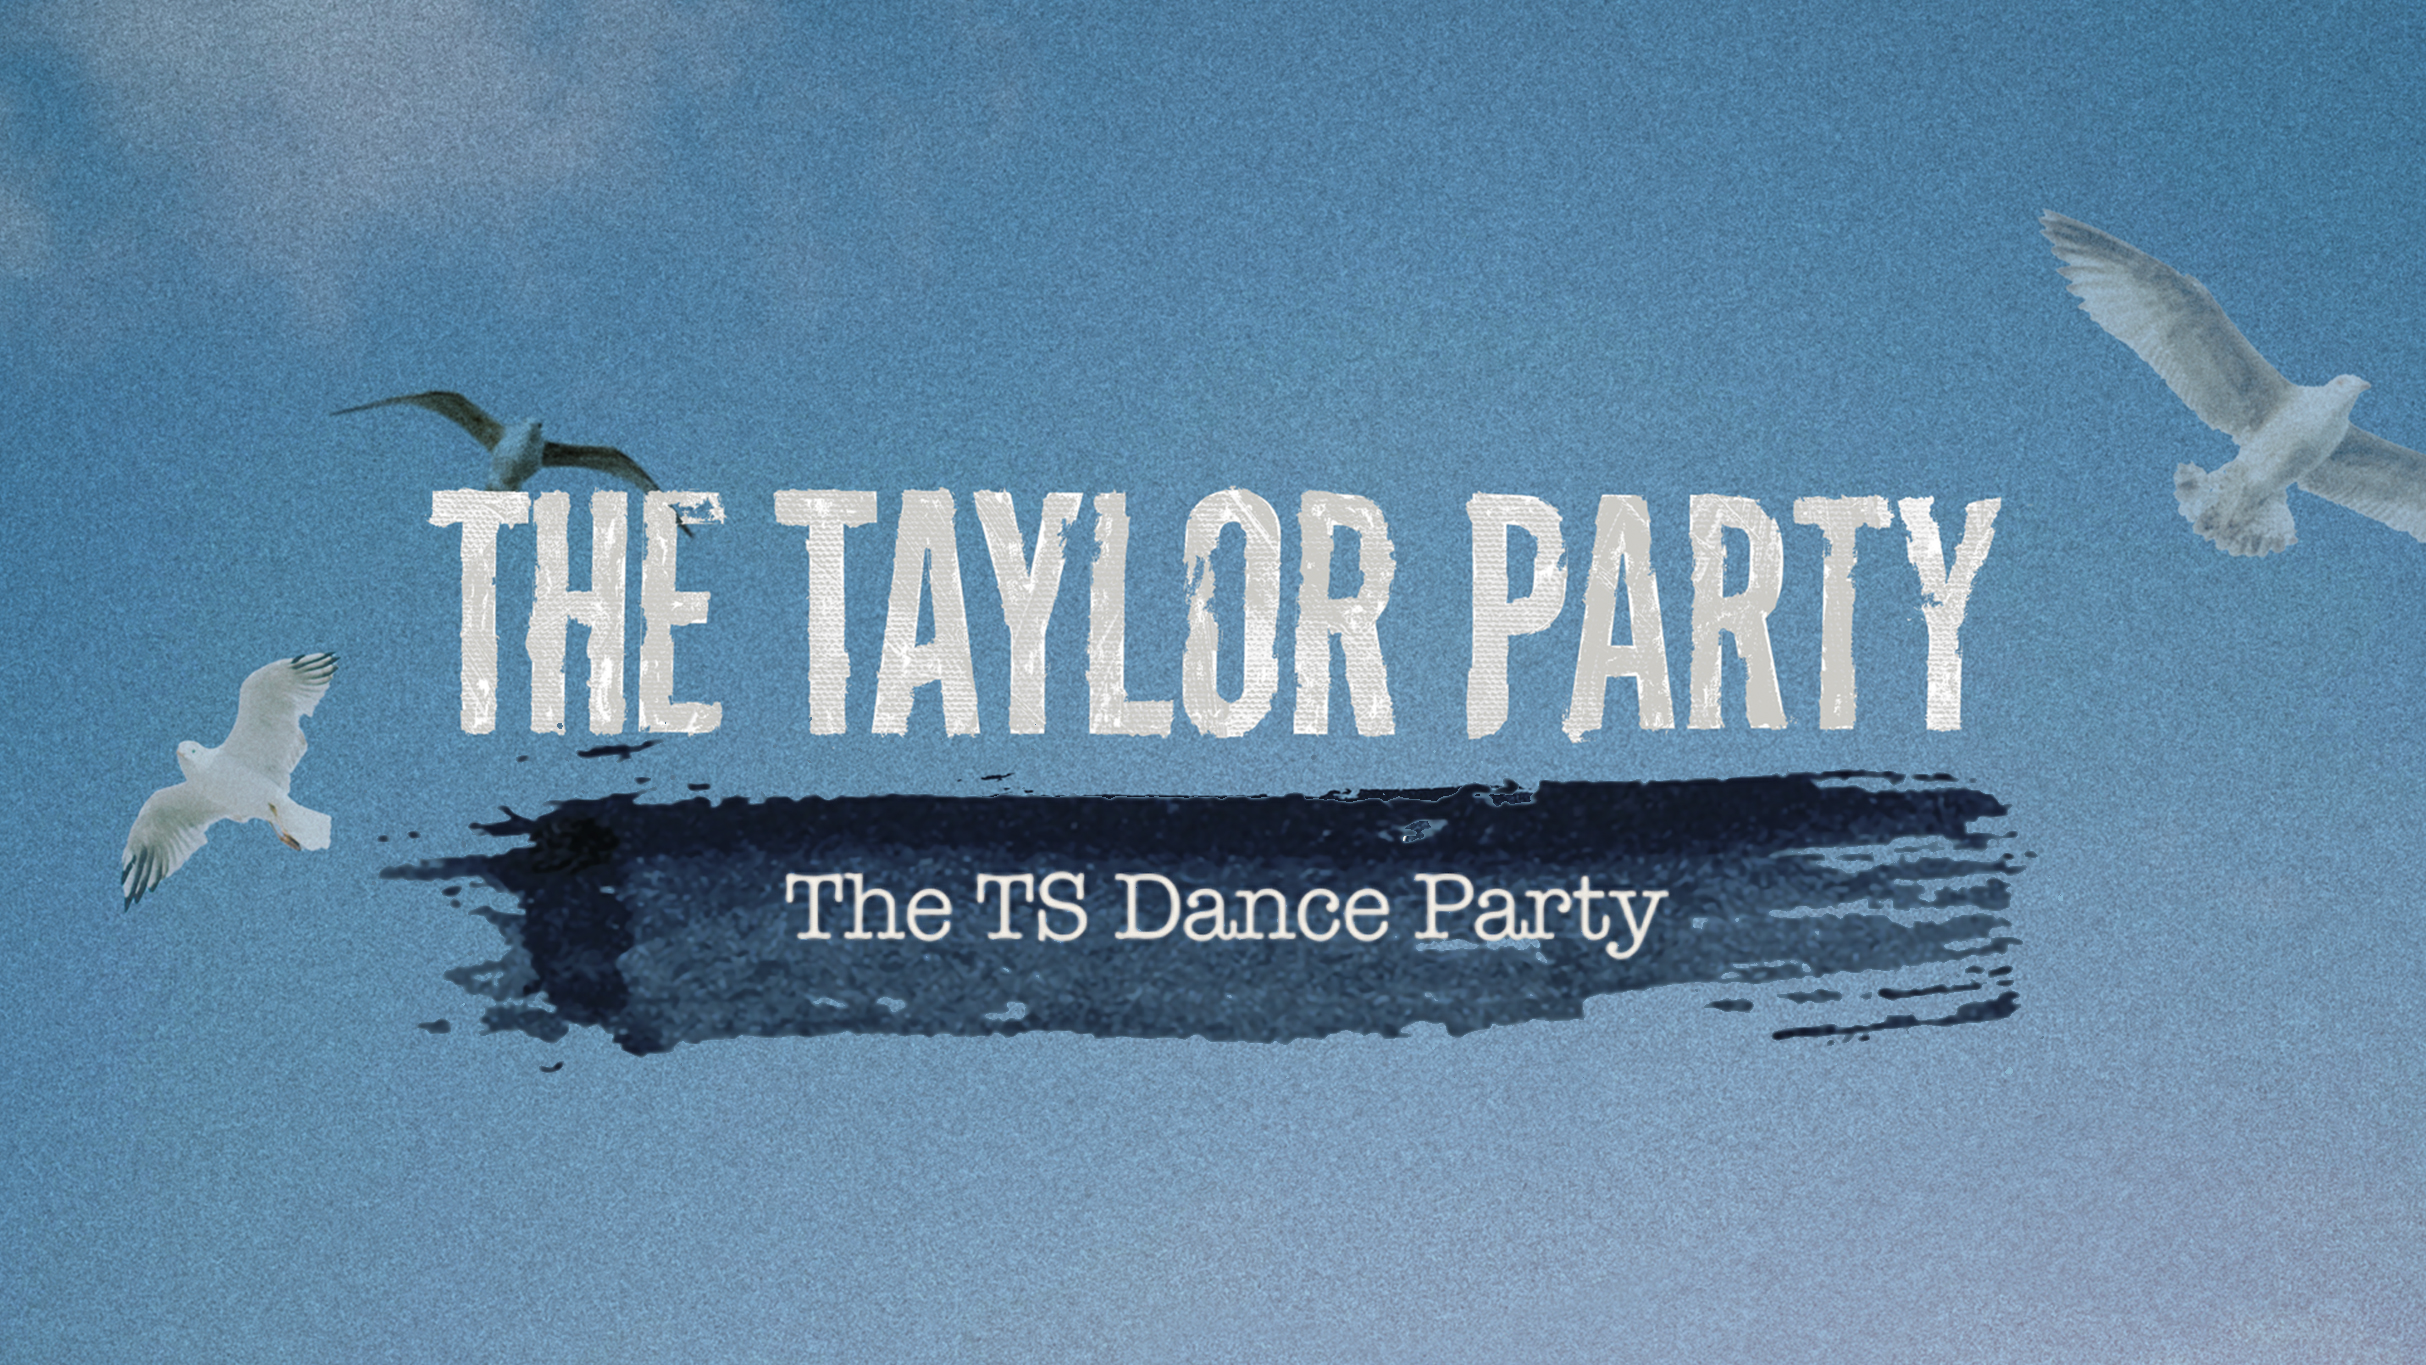 THE TAYLOR PARTY: THE TS DANCE PARTY - 18+ event